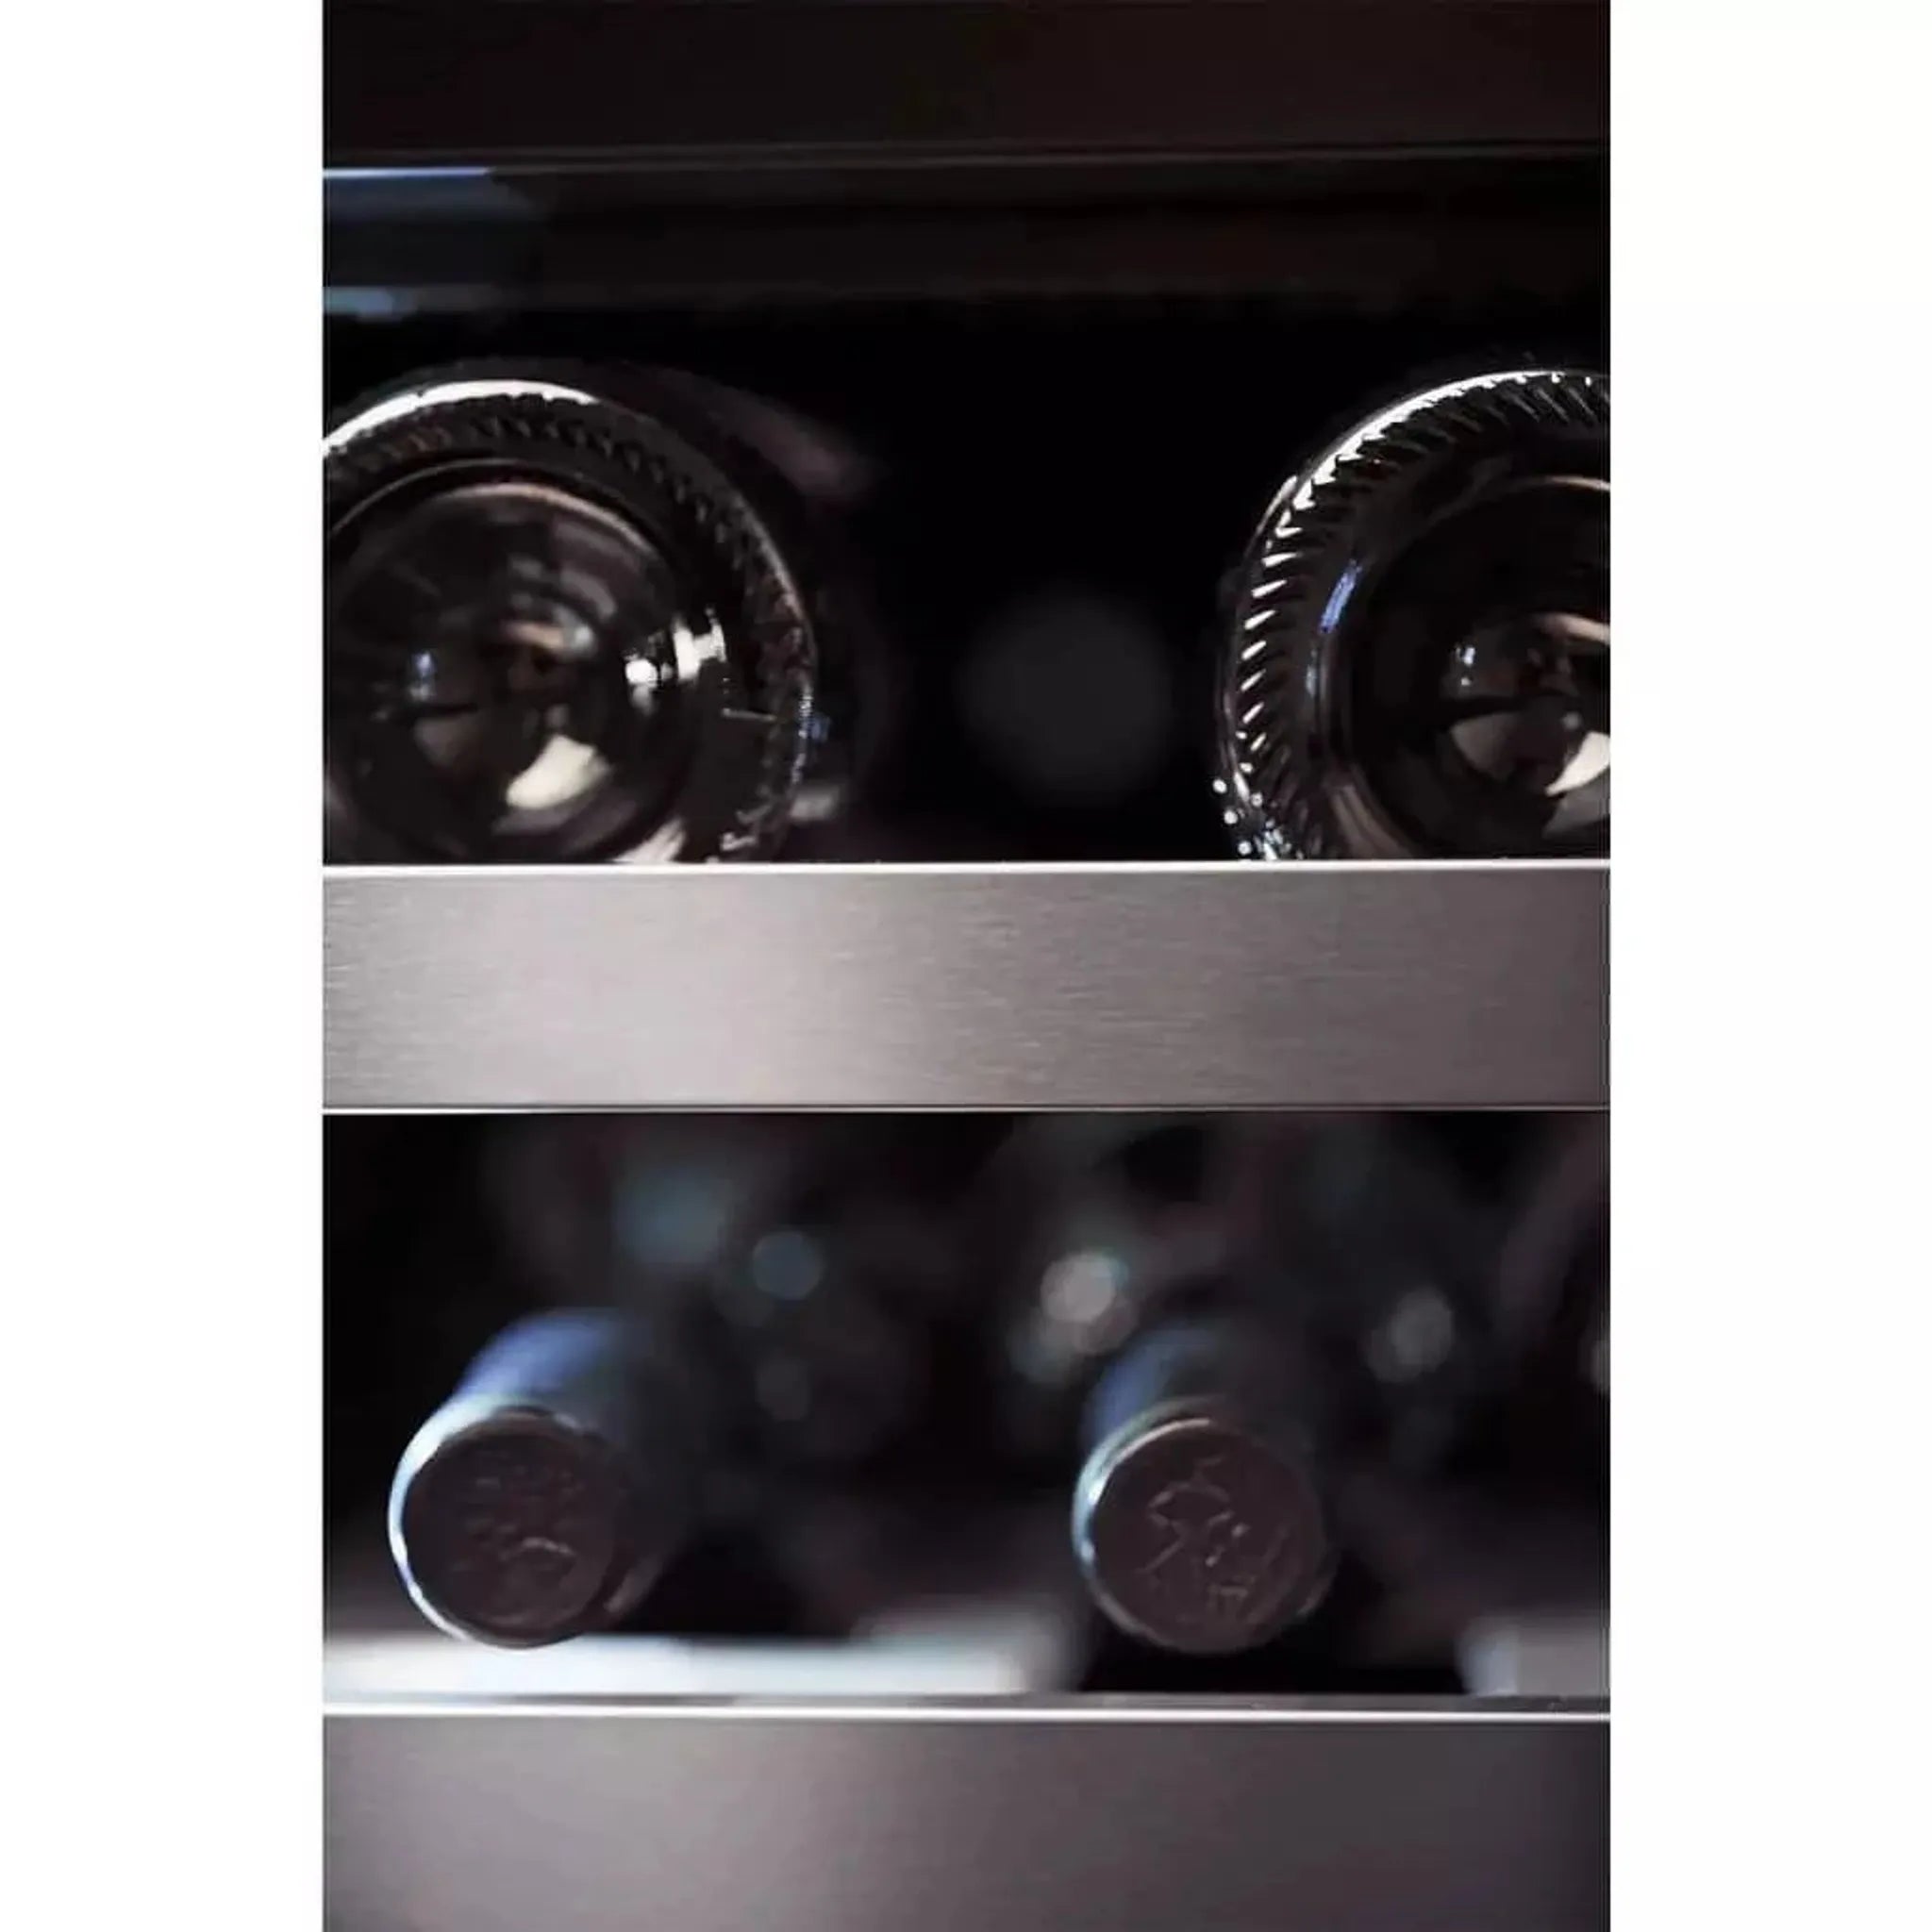 mQuvée - 600mm - Undercounter - WineCave 60D Fullglass Black - Push/Pull